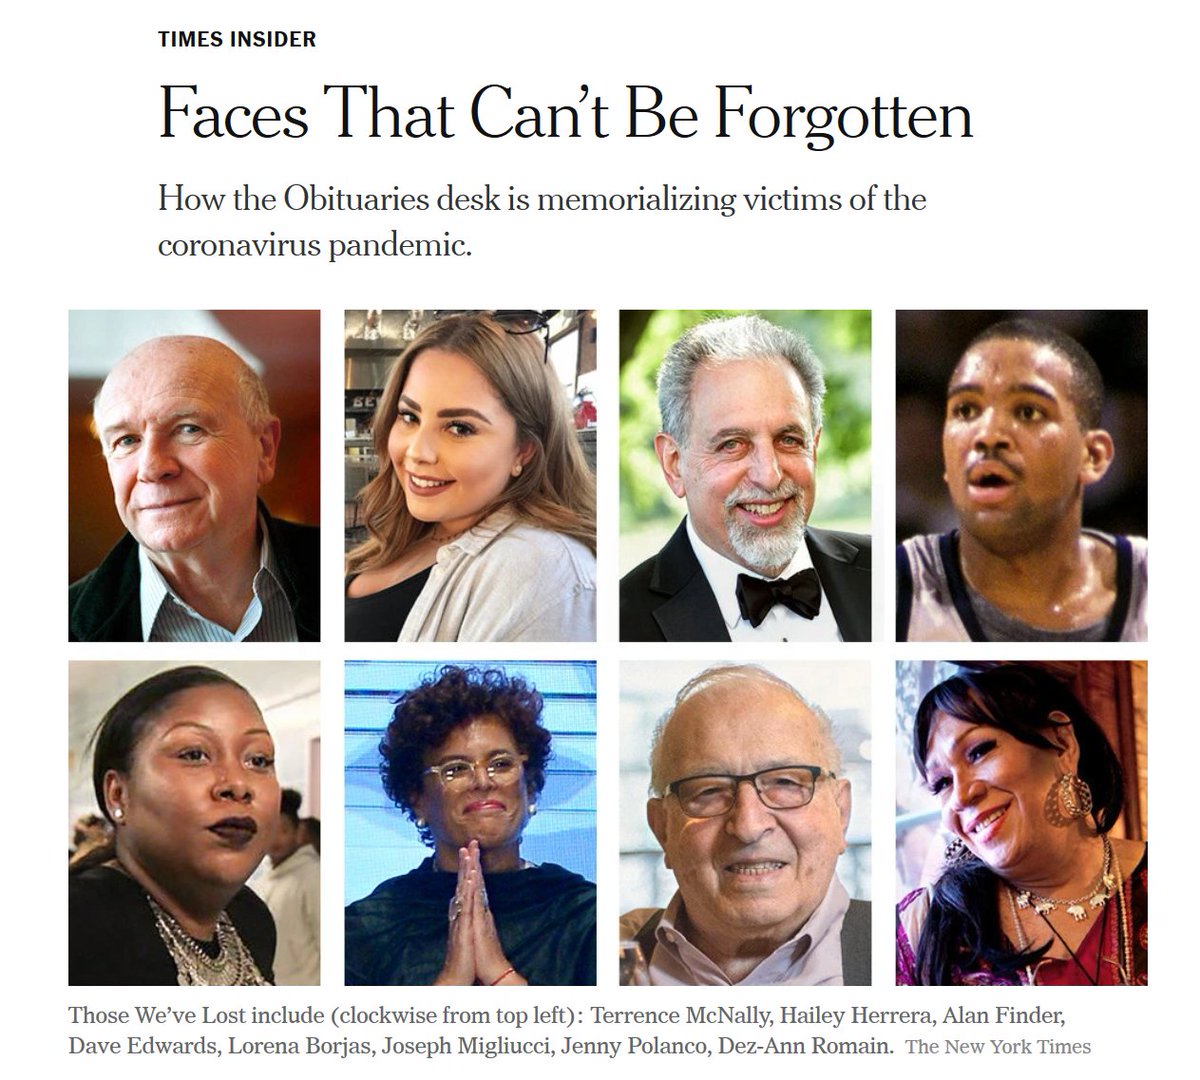 15/x Another special feature in the NYT: The victims of the  #coronavirus pandemic.The Obituaries: https://www.nytimes.com/interactive/2020/obituaries/people-died-coronavirus-obituaries.htmlBackground on the Series https://www.nytimes.com/2020/04/16/reader-center/coronavirus-obits.html